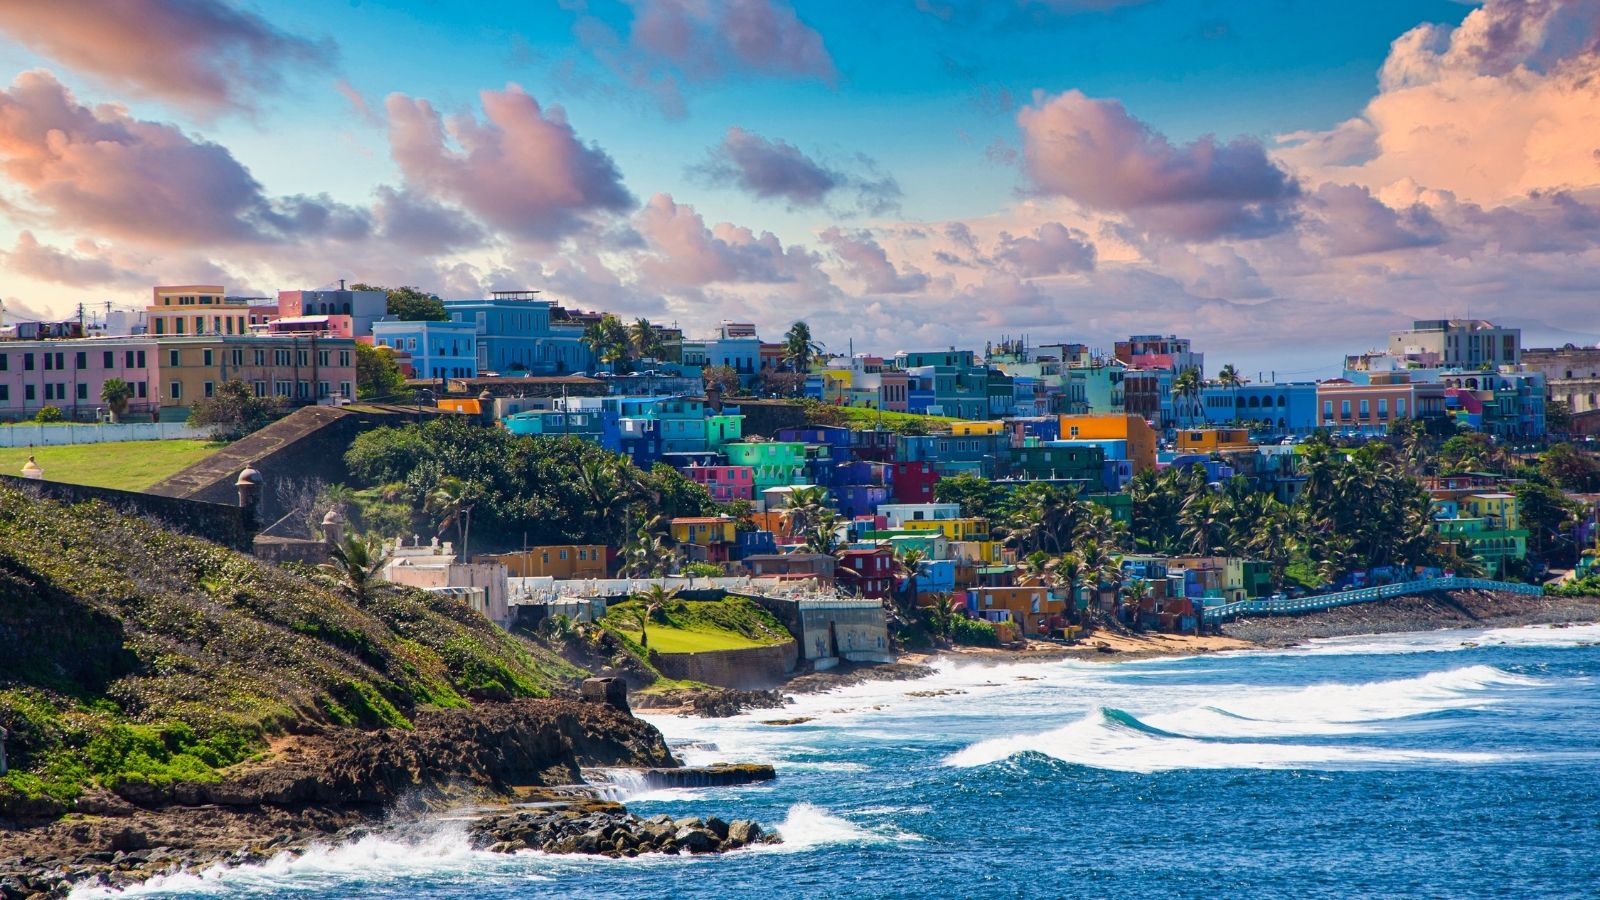 The colorful coast of Old San Juan, Puerto Rico (Photo: Shutterstock)